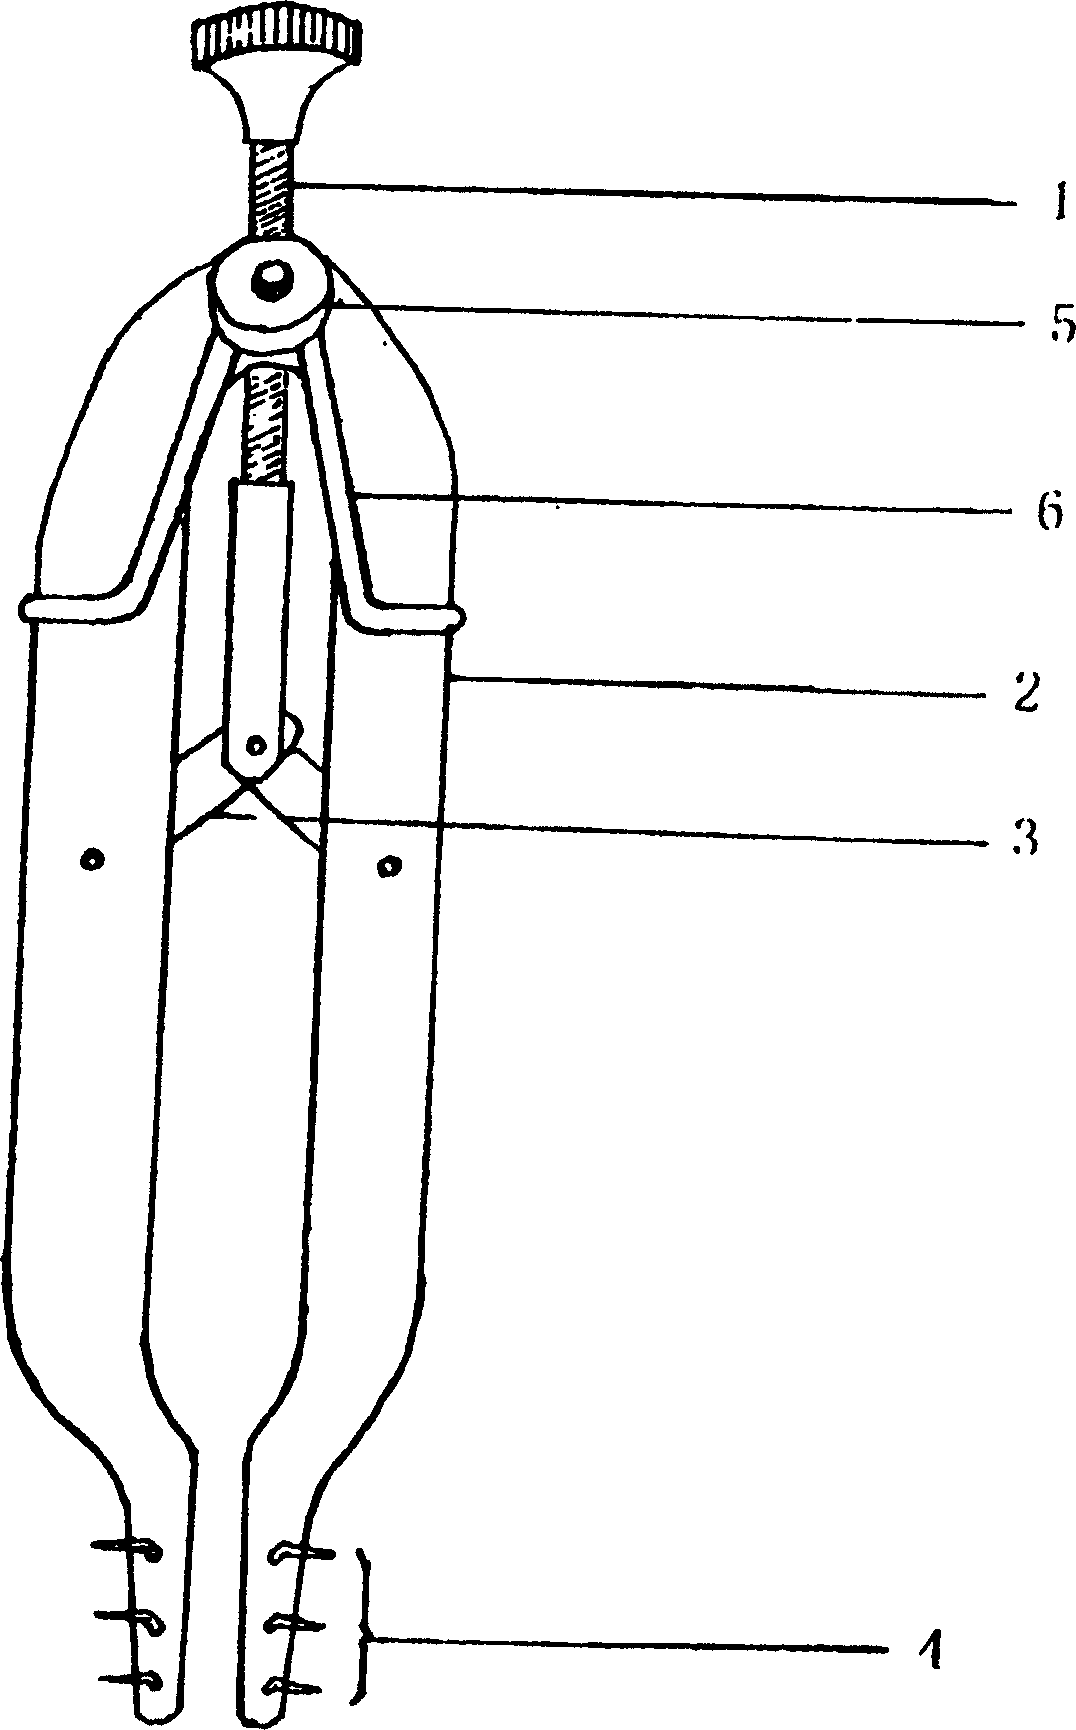 Lacrimal retractor with lighting device